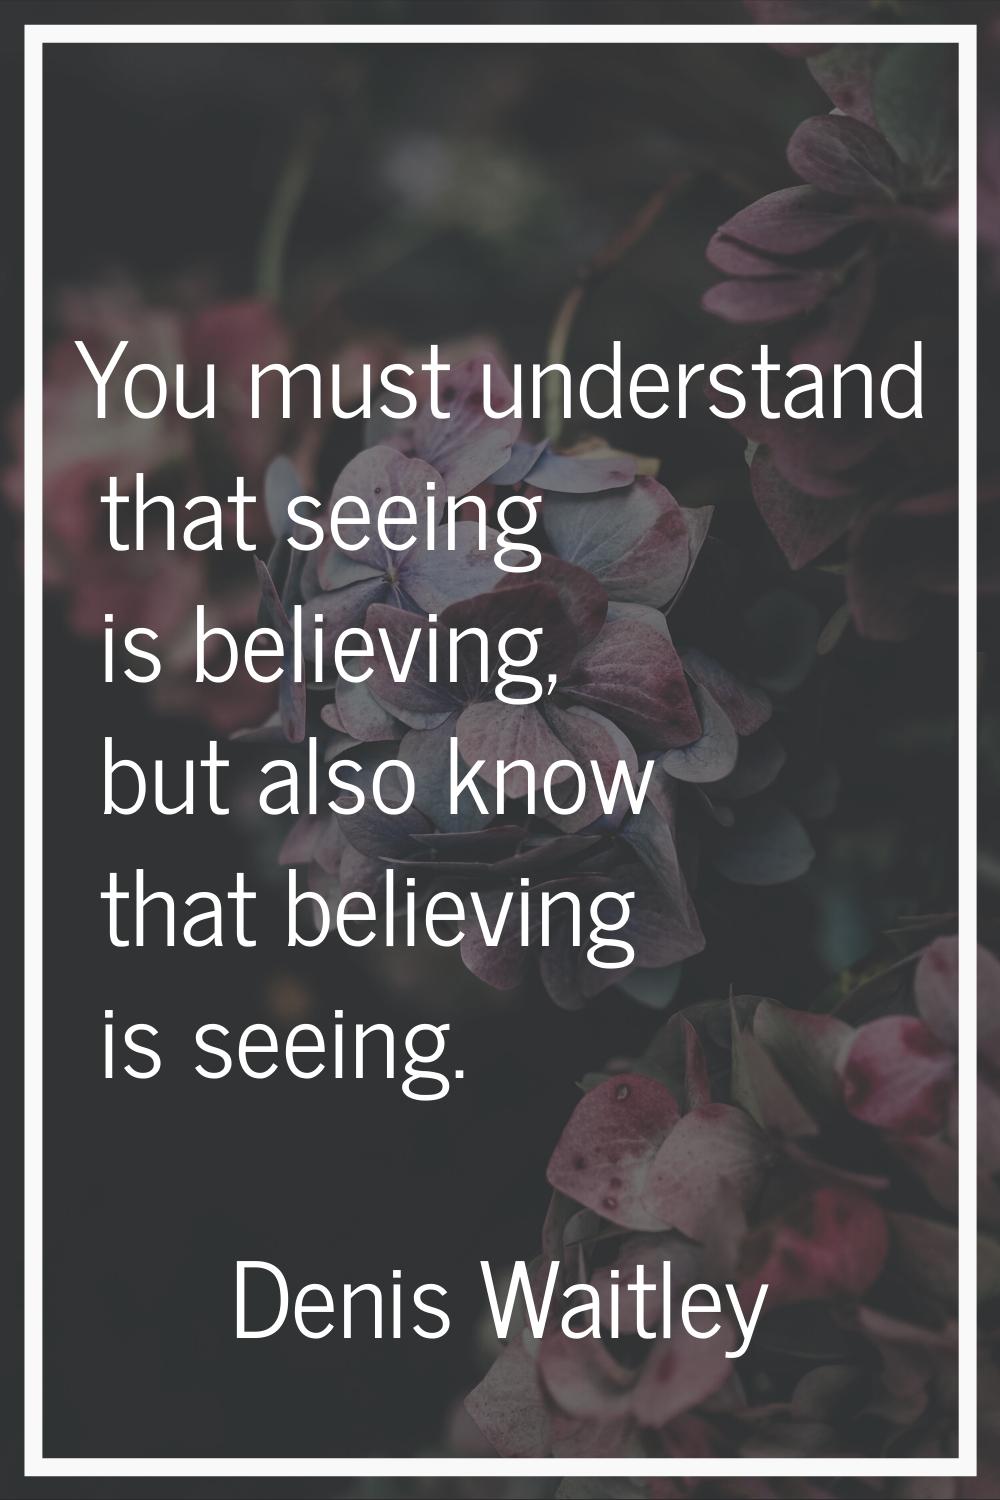 You must understand that seeing is believing, but also know that believing is seeing.